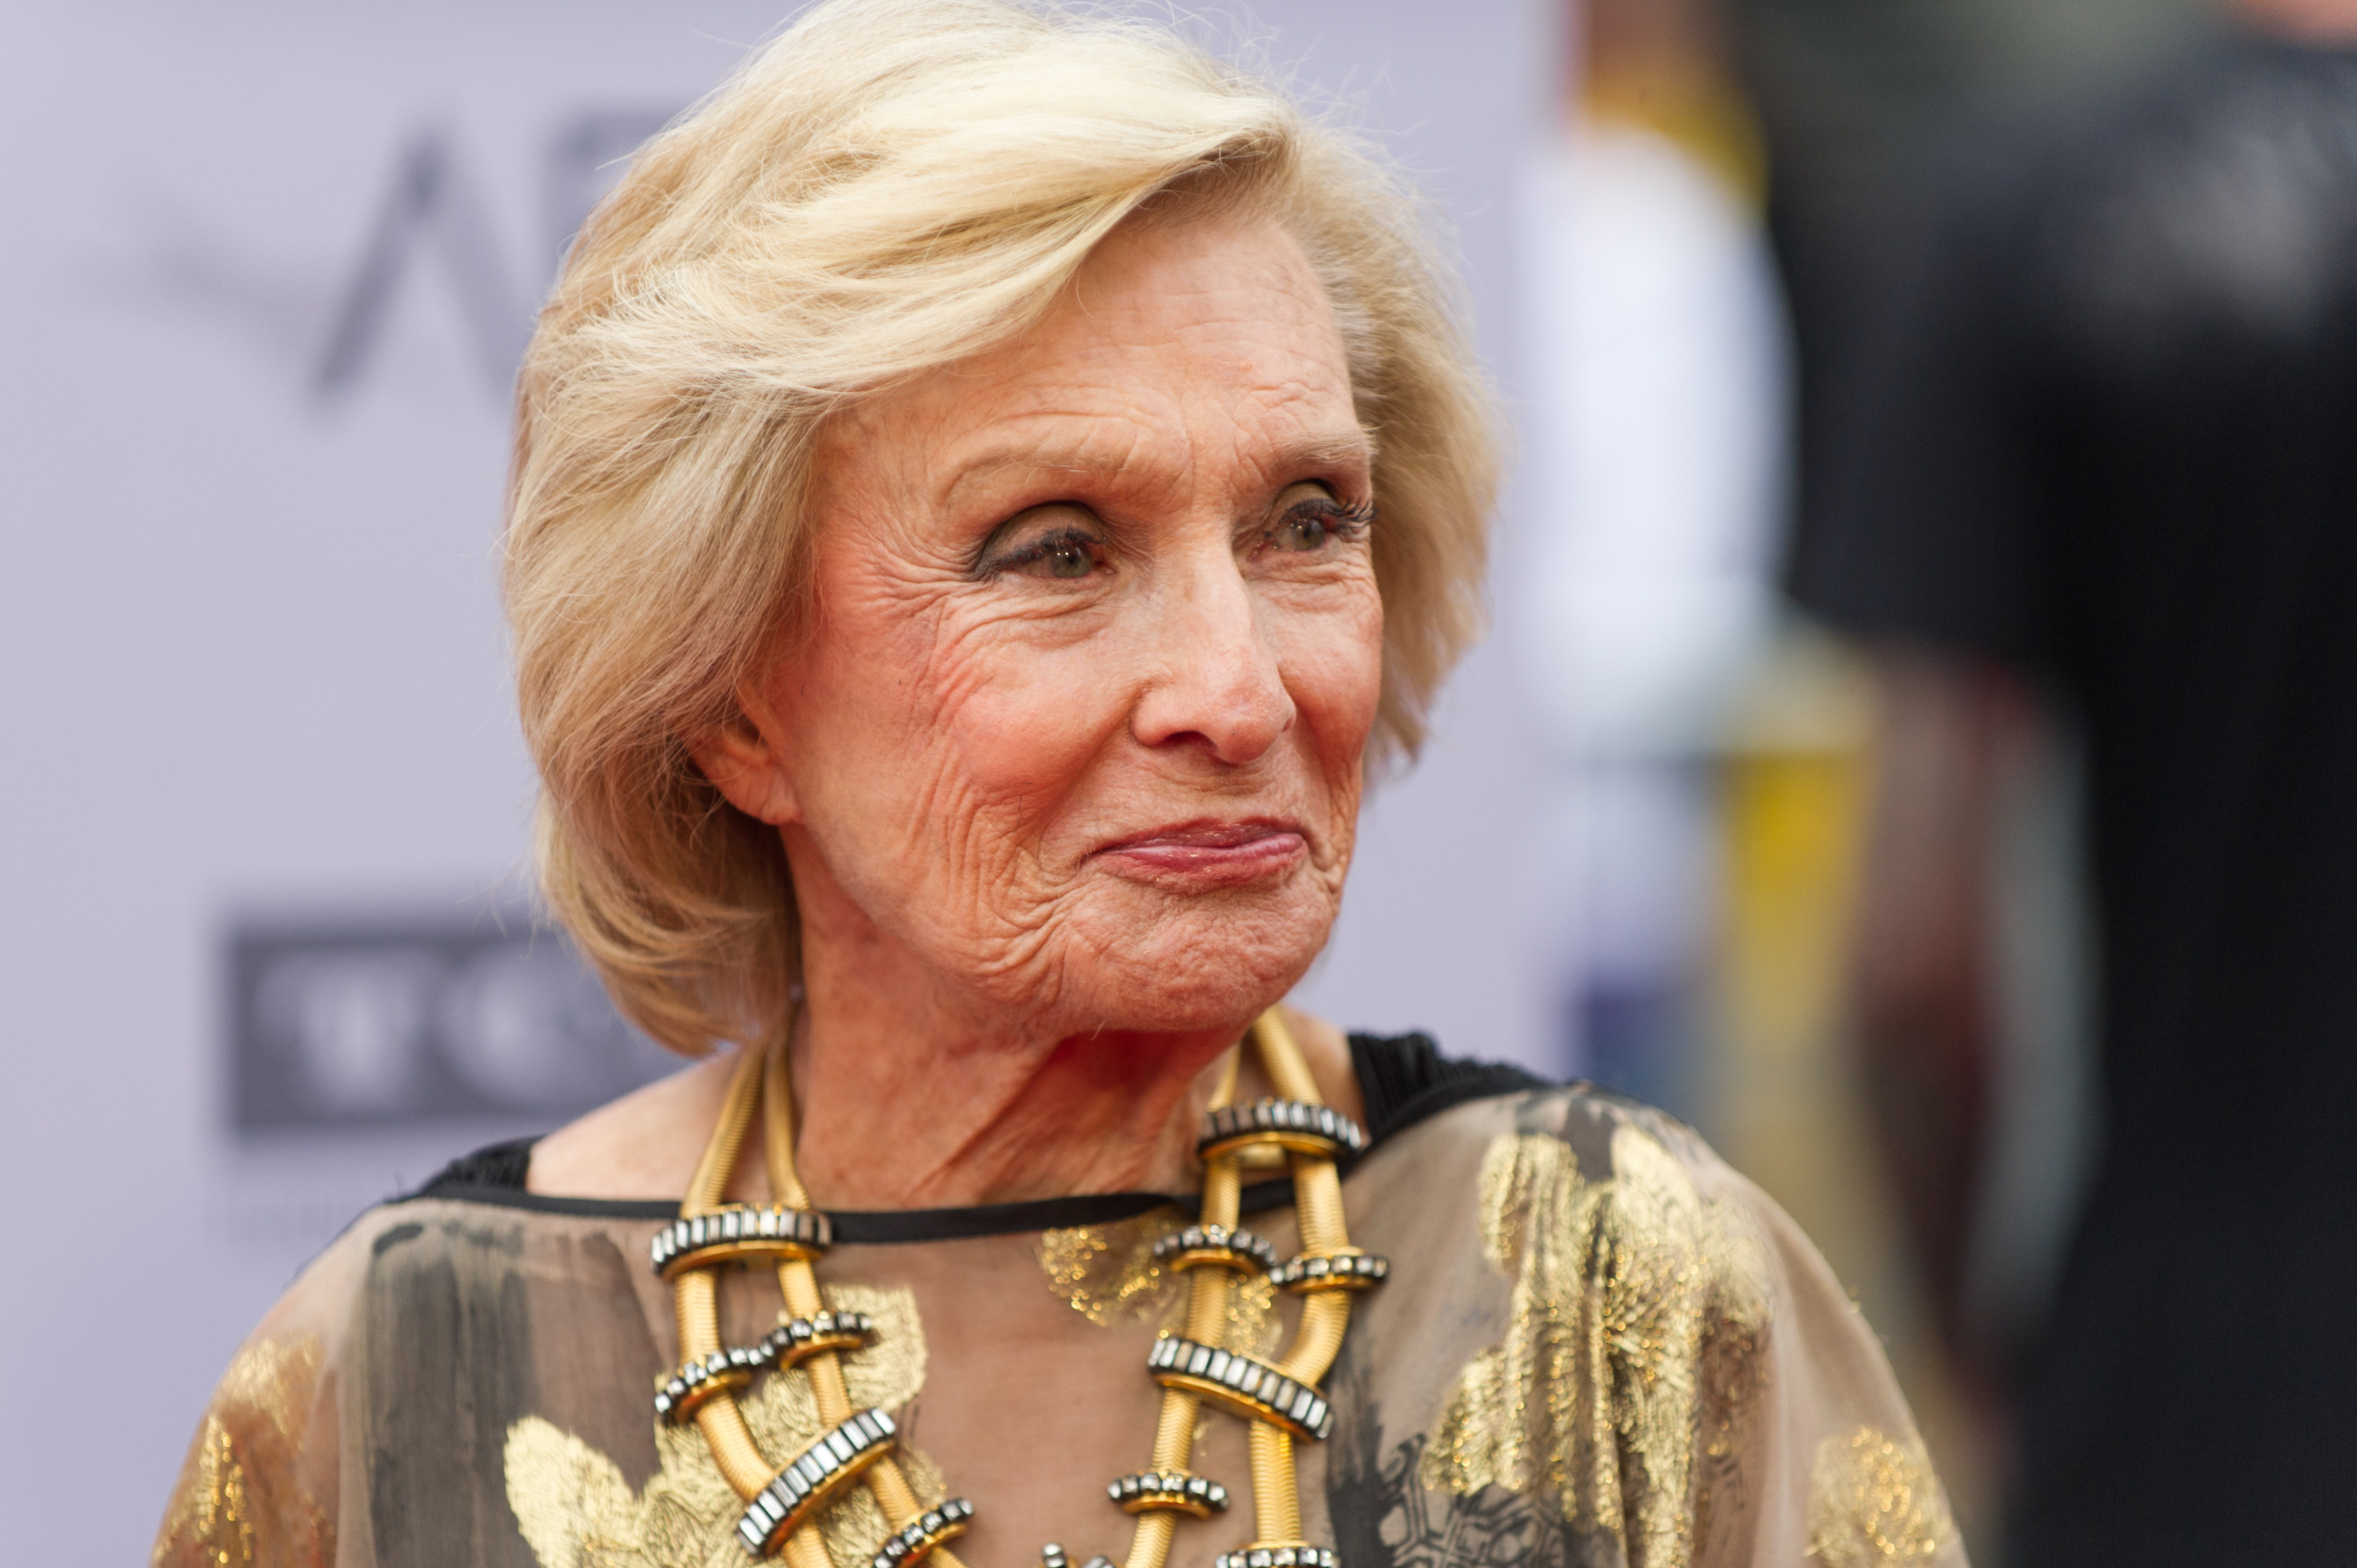 Cloris Leachman in a large necklace on a red carpet